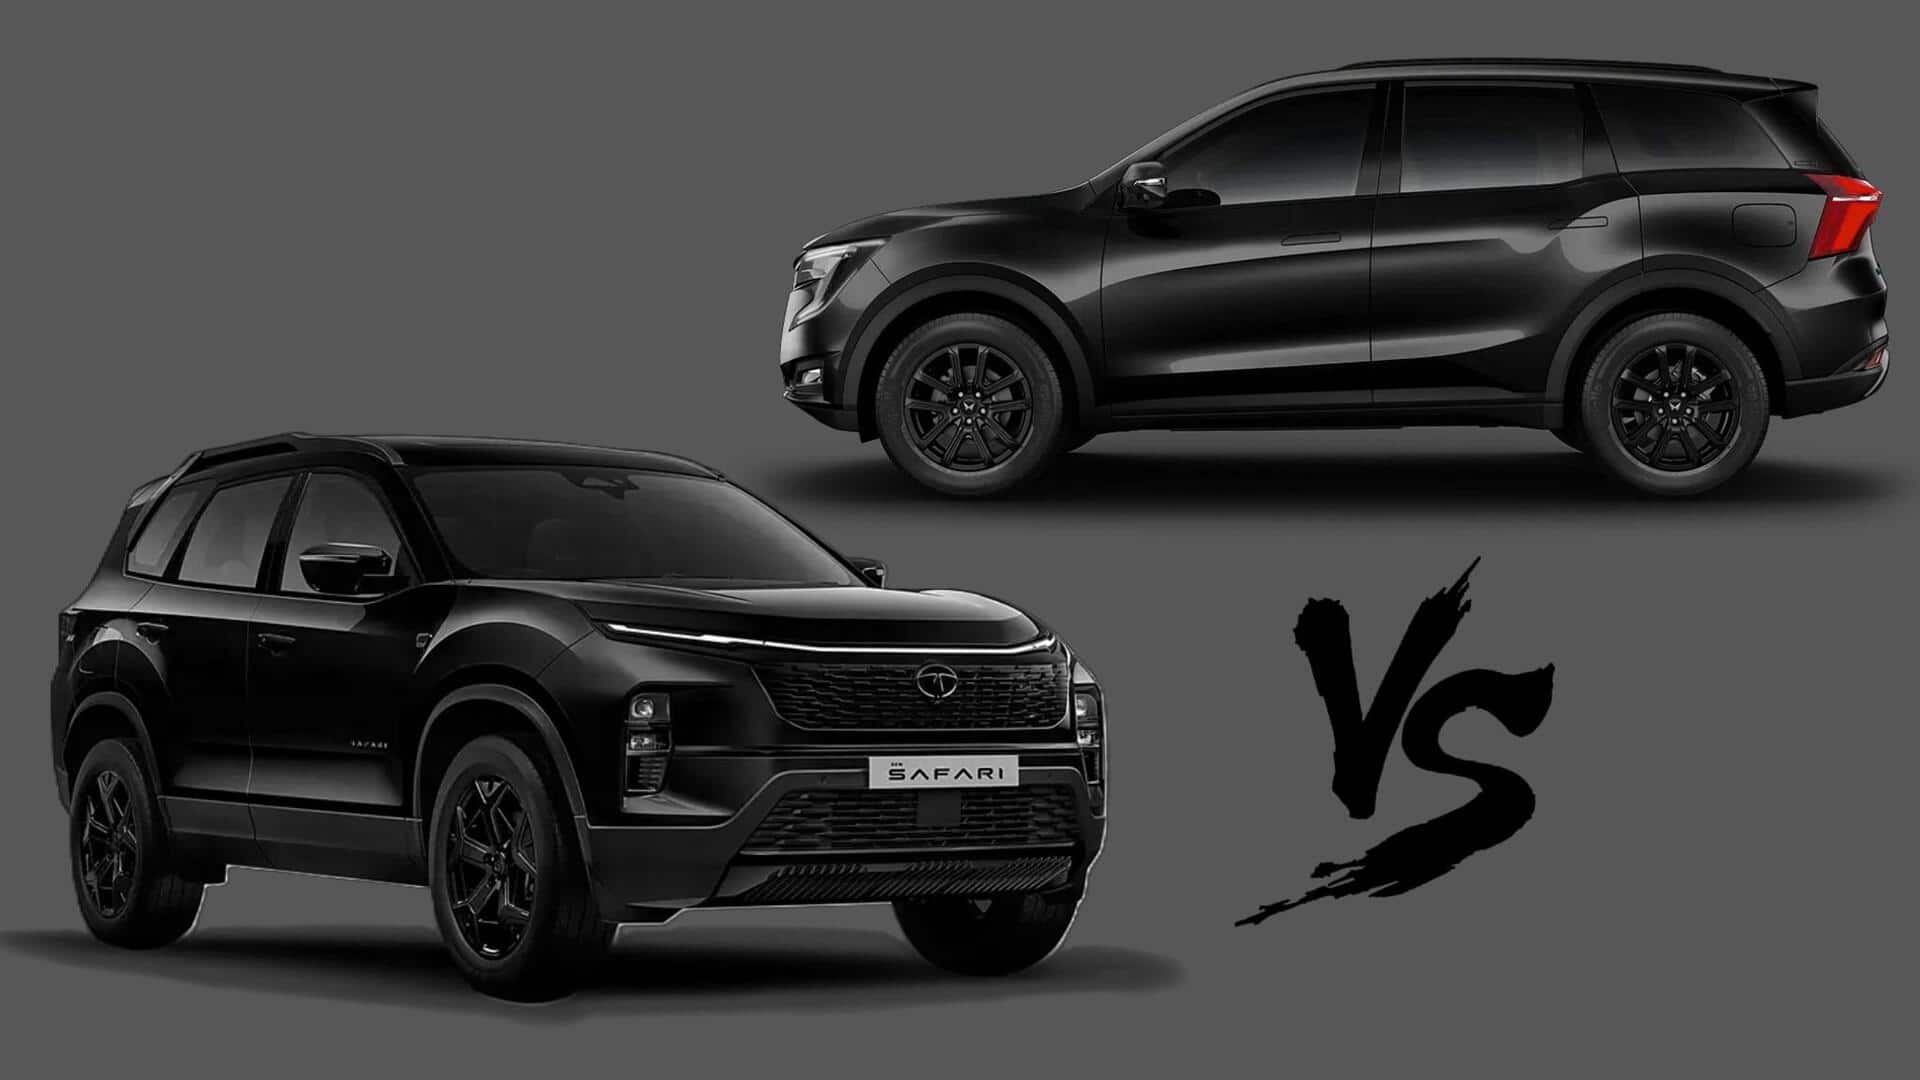 Which blacked-out SUV is better? Tata Safari or Mahindra XUV700